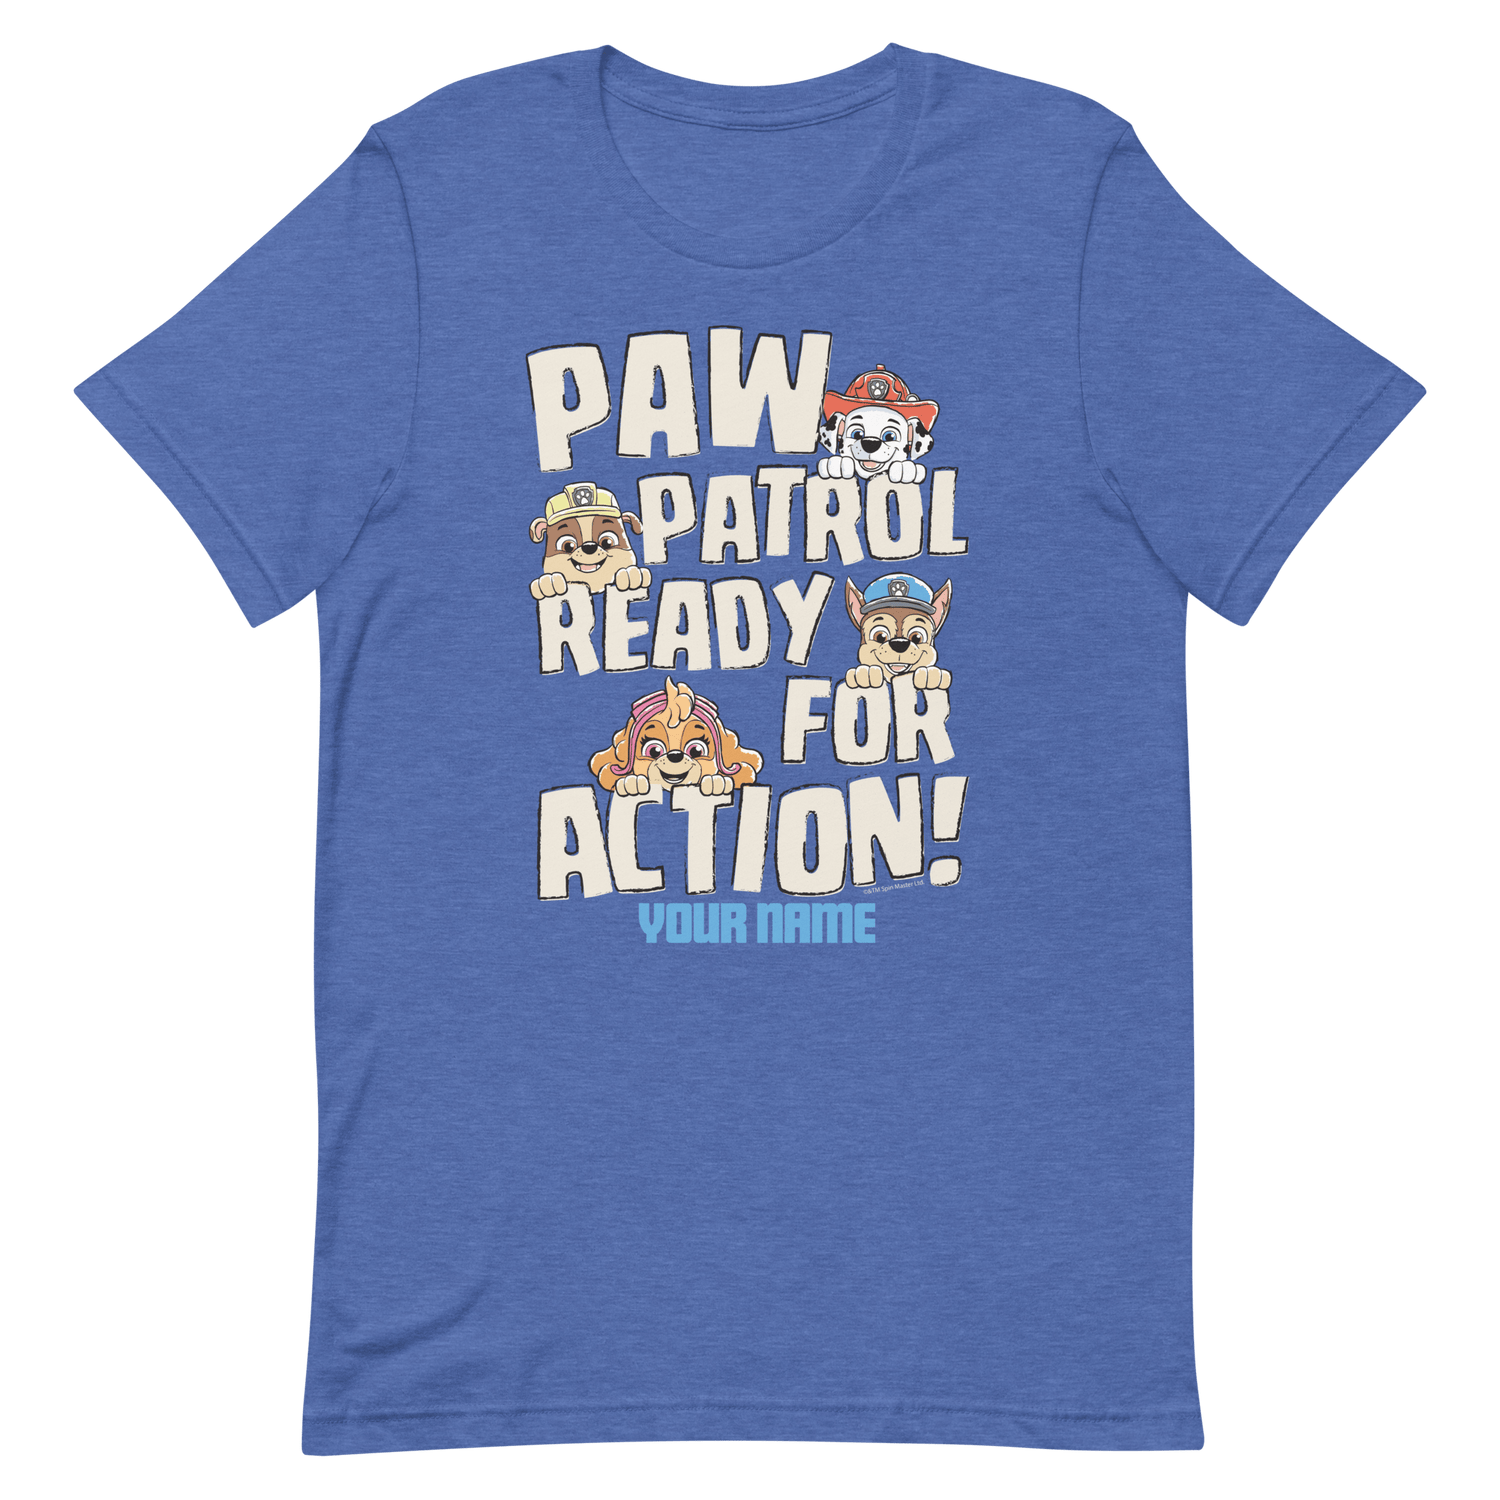 PAW Patrol Ready For Action Personalized Adult Short Sleeve T - Shirt - Paramount Shop